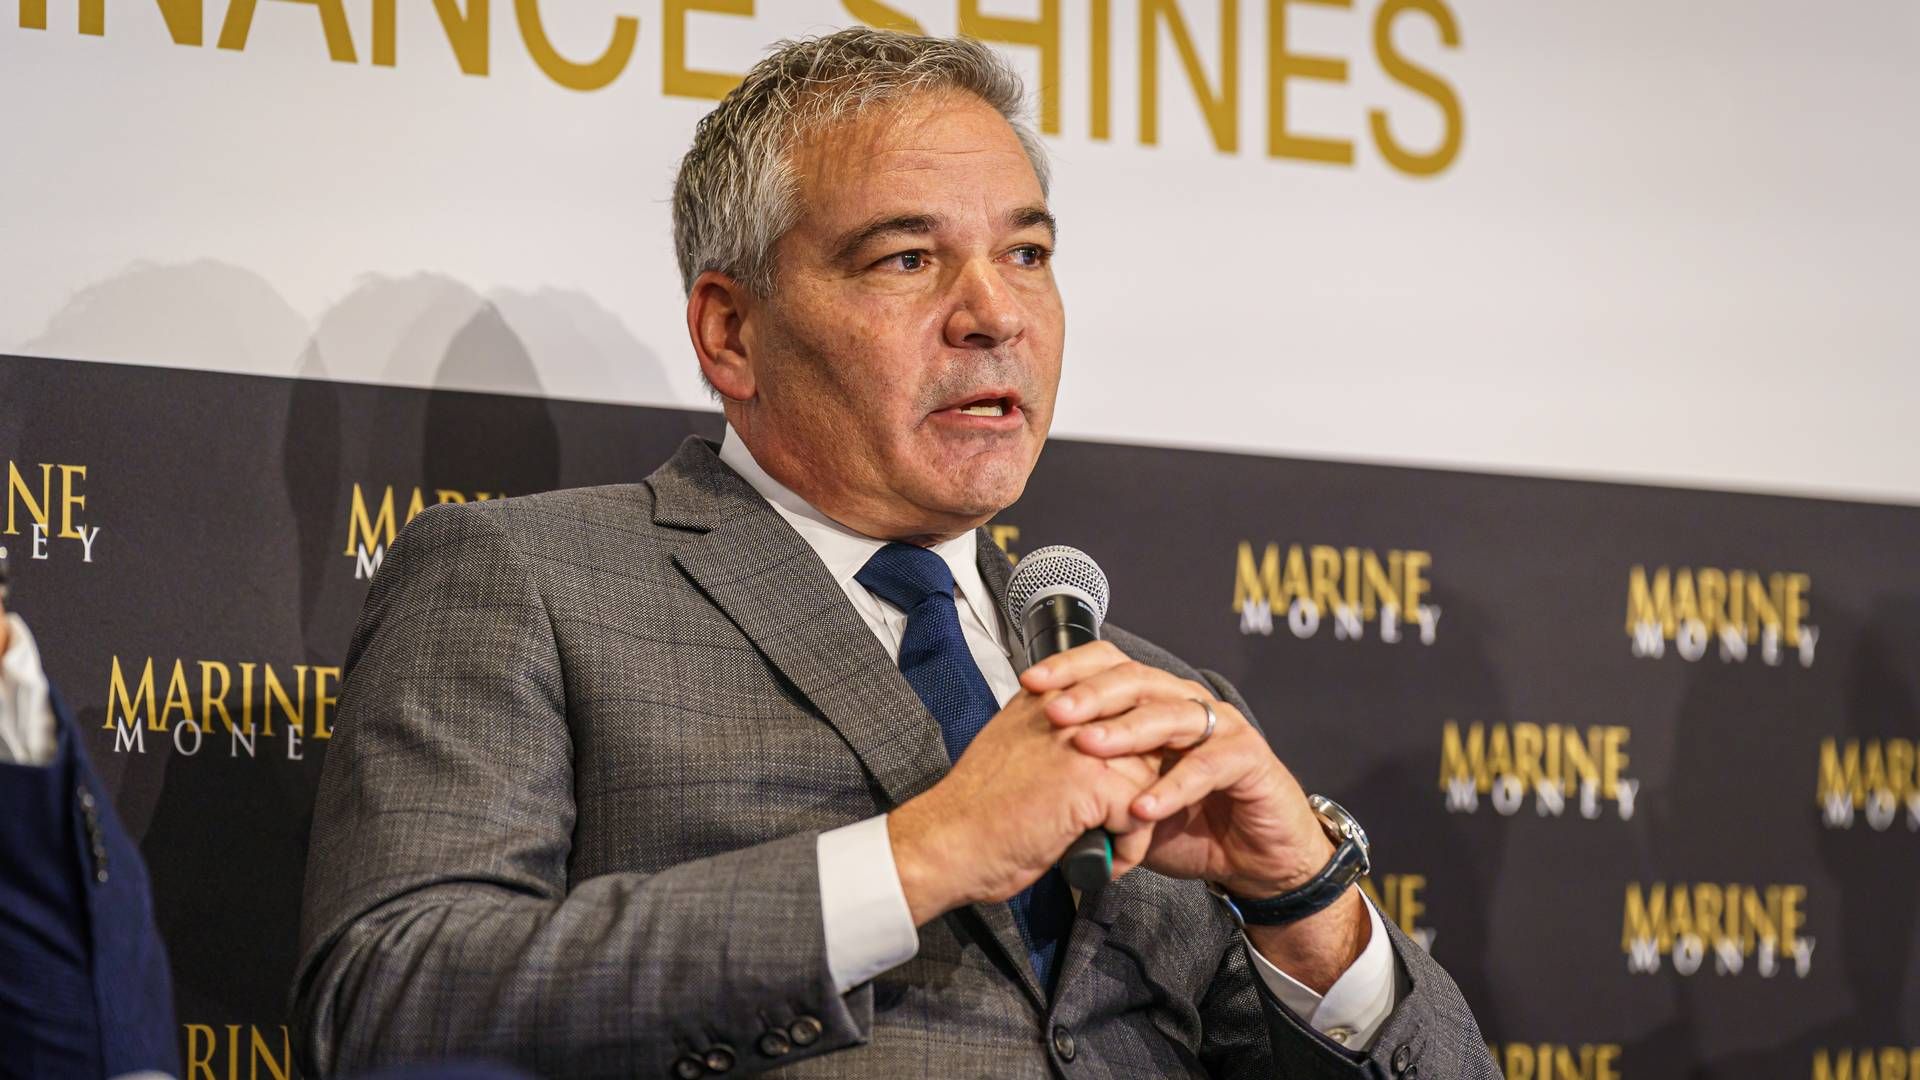 ”We saw a meaningful improvement to our bottom line in Q4, reflecting both a strong recovery in freight rates and an increase in our relative performance against the market,” says Eagle Bulk CEO Gary Vogel. | Photo: David Butler / Marine Money